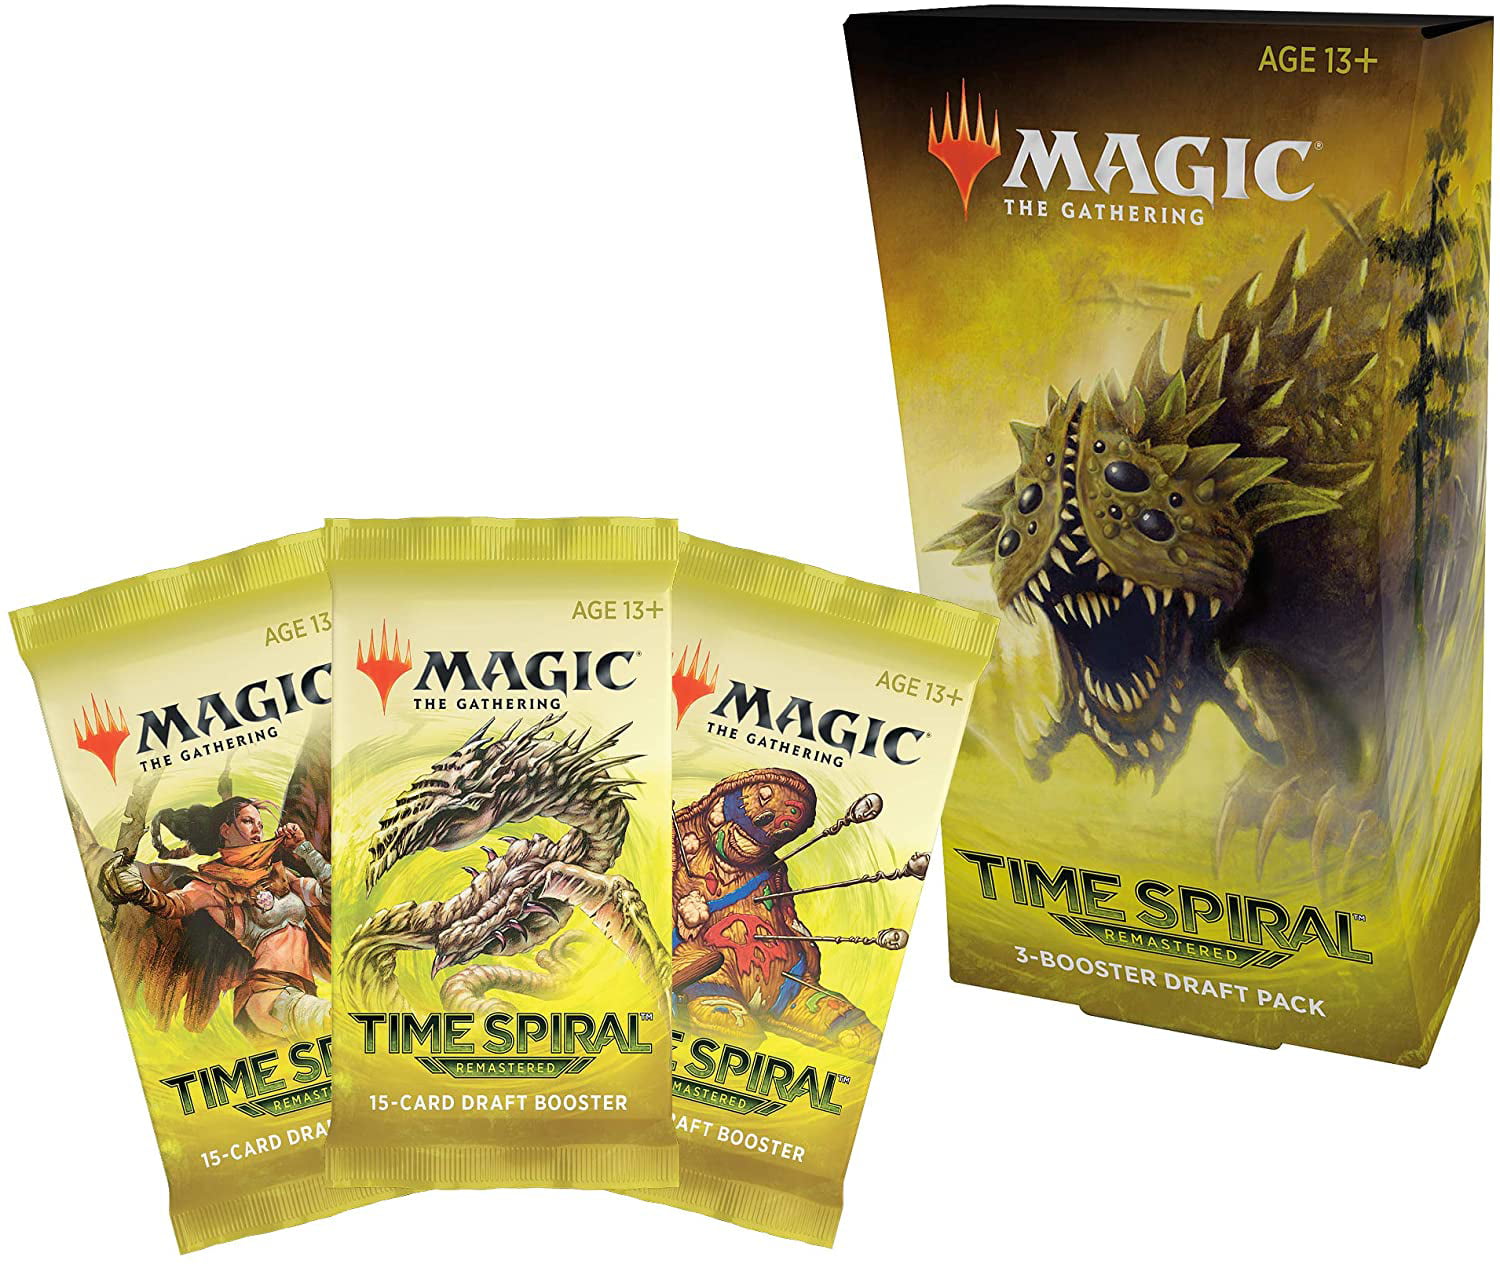 Details about   Magic the Gathering Time Spiral 15-Card Draft BoosterSealed Products  